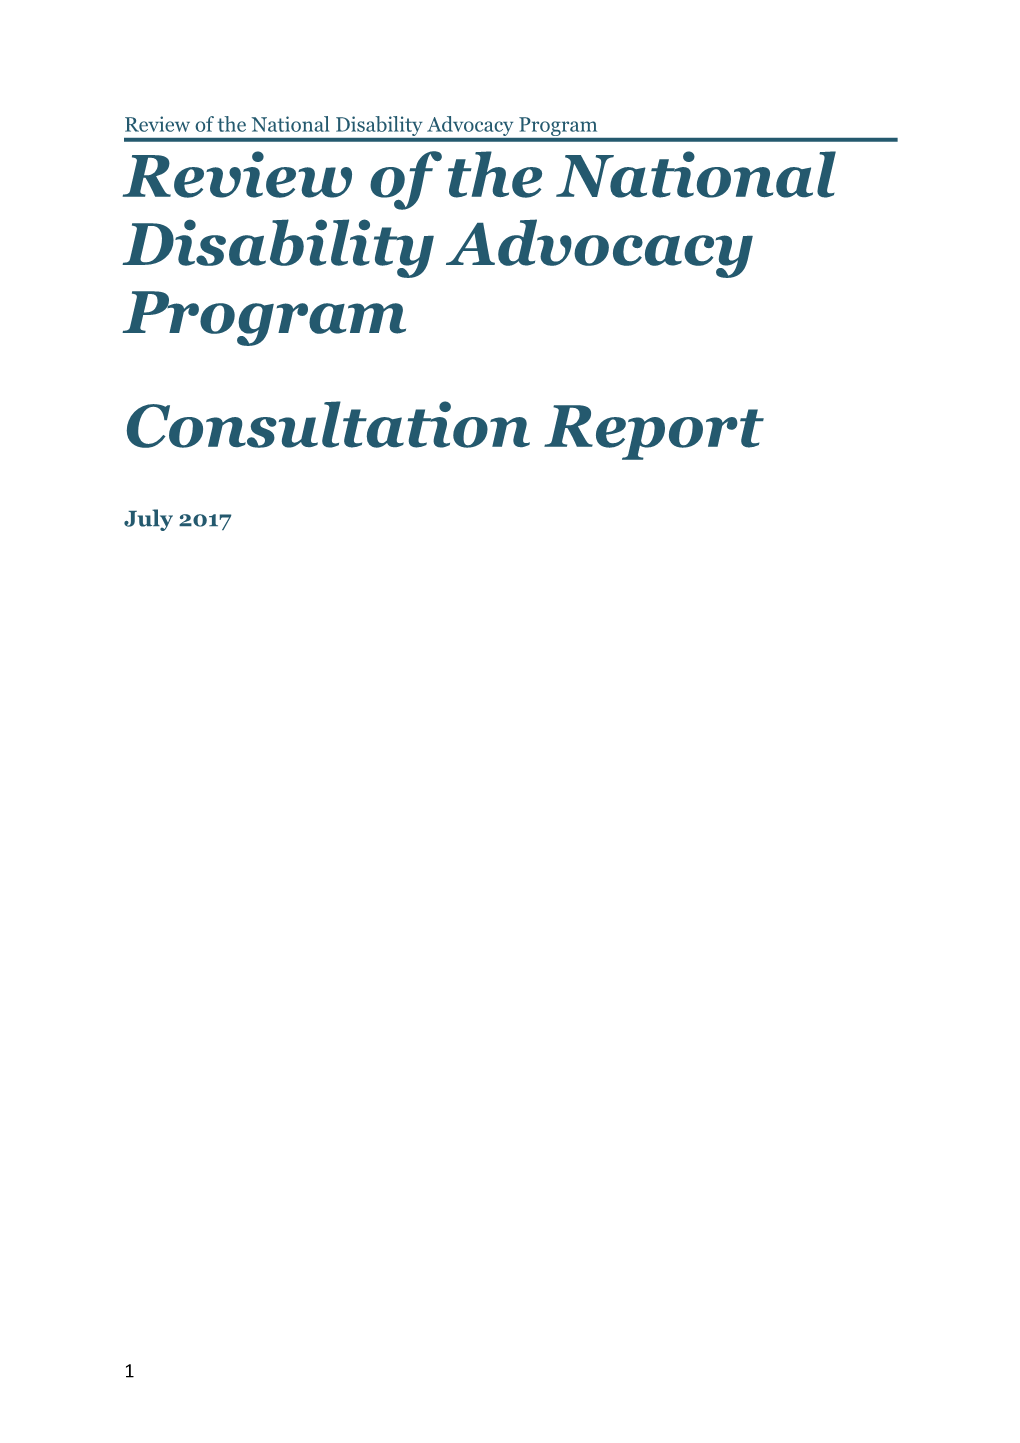 Review of the National Disability Advocacy Program